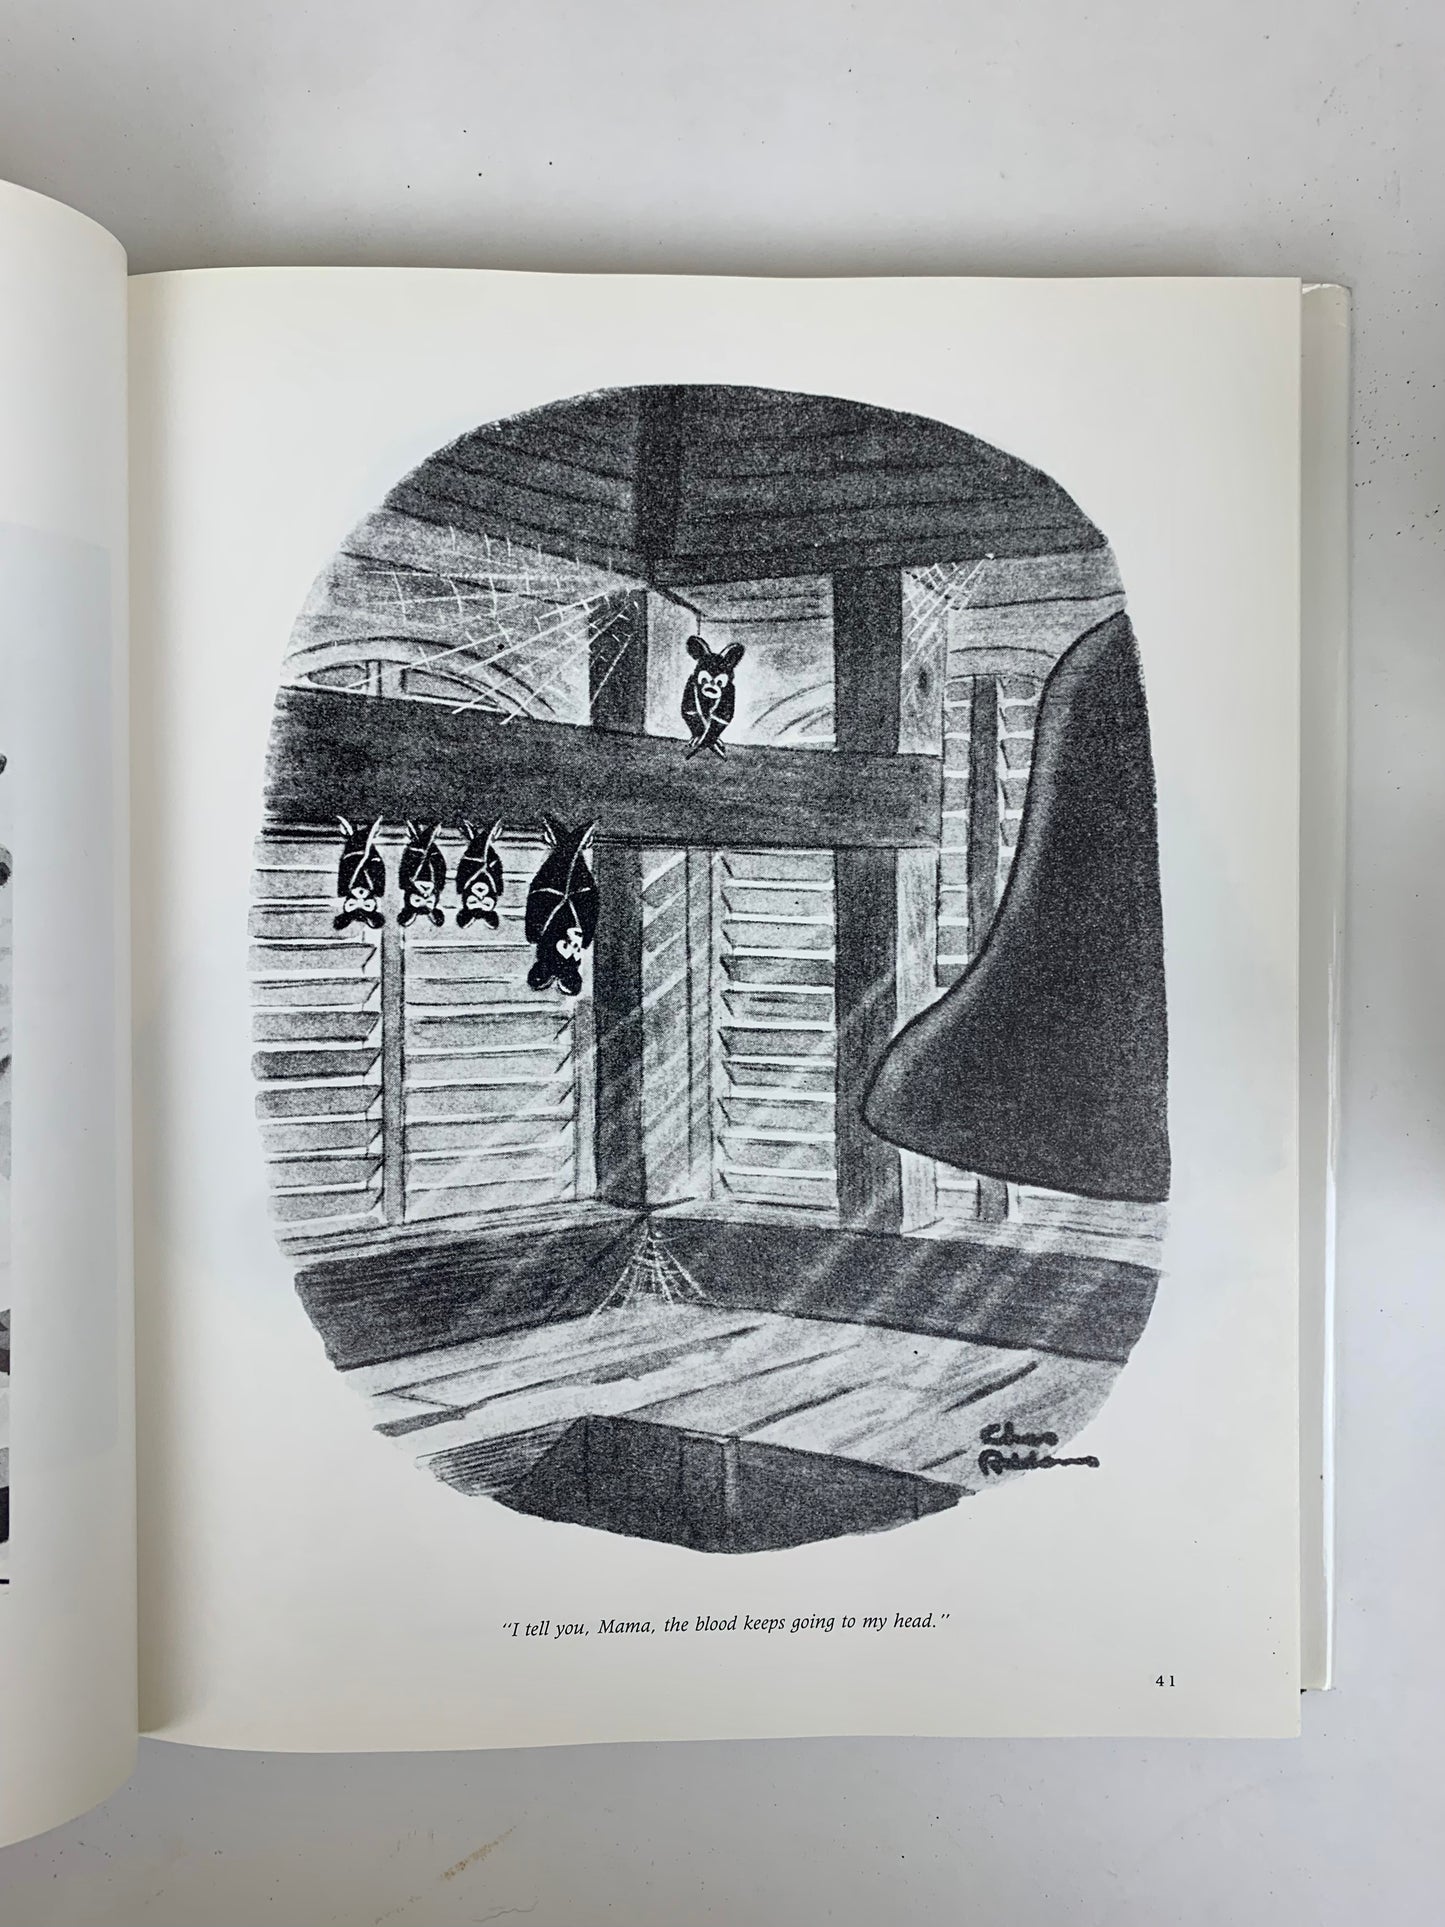 The World of Chas Addams by Tee Addams